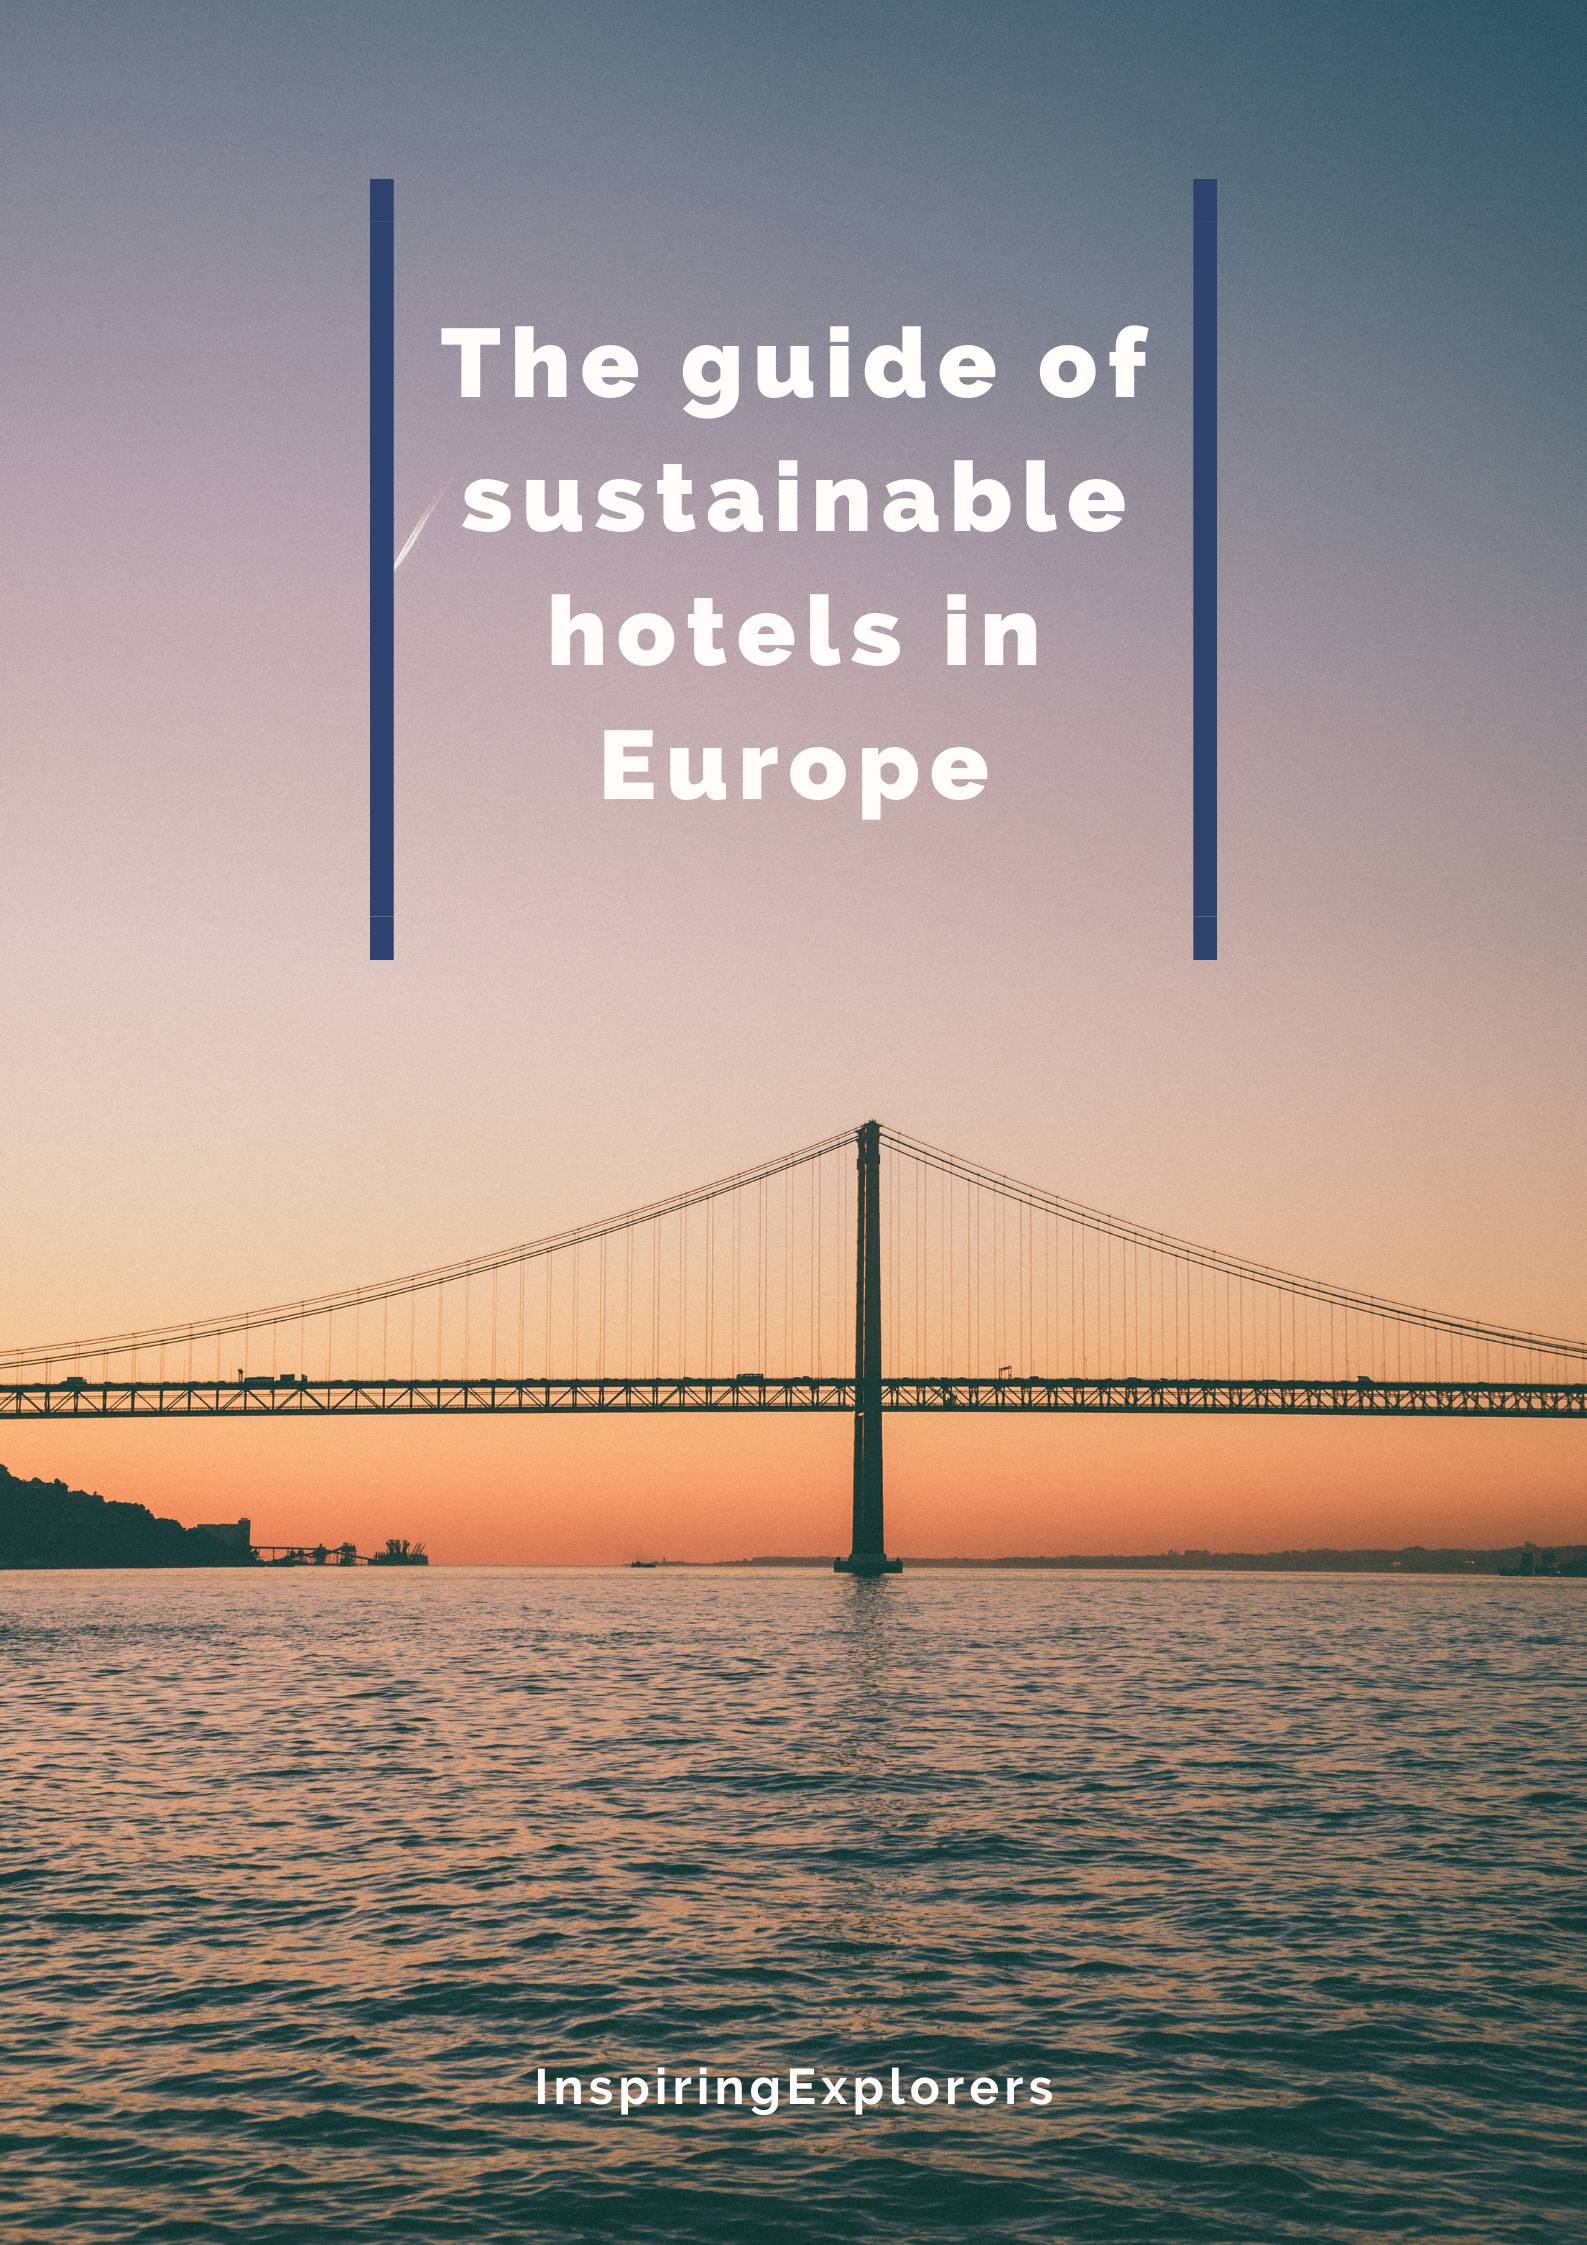 The guide of sustainable hotels in Europe